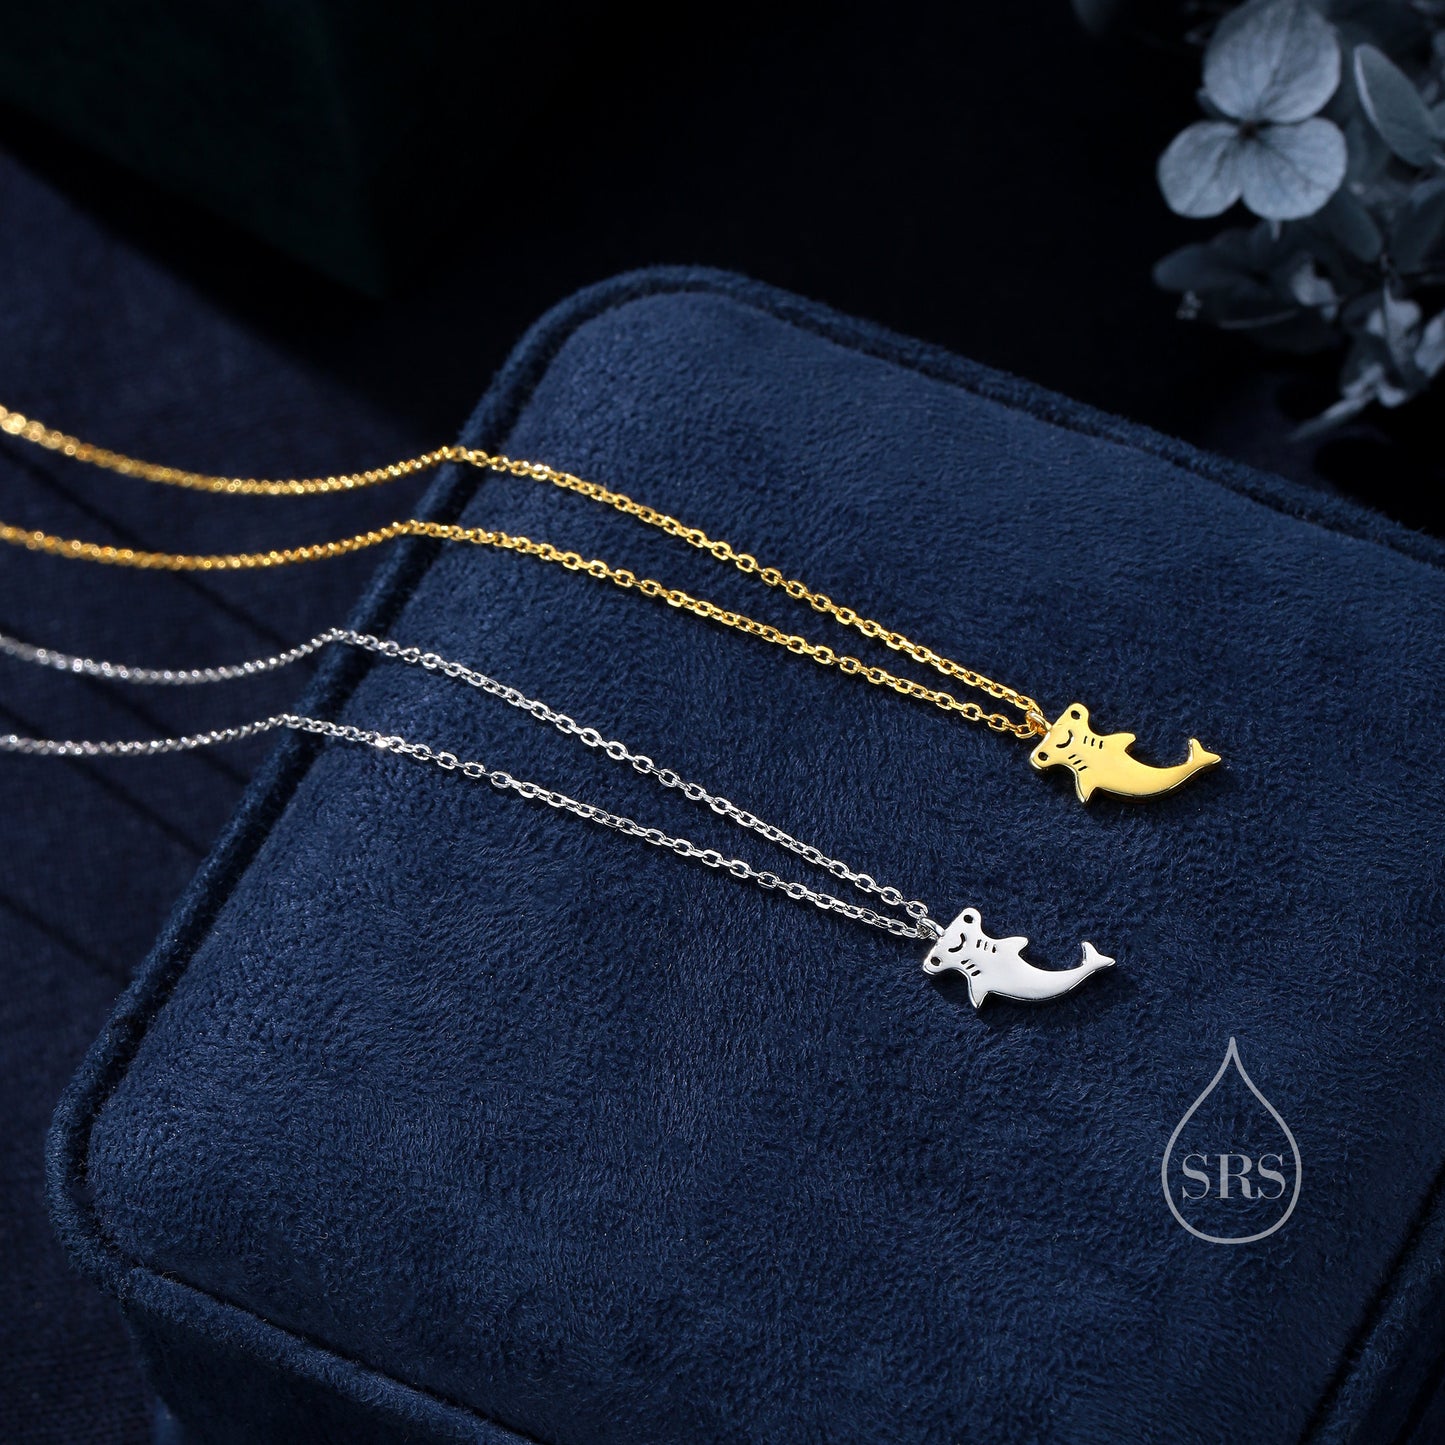 Tiny Smiling Hammerhead Shark Pendant Necklace in Sterling Silver, Silver or gold, Shark Necklace, Shark Fish Necklace, Cute Fish Necklace